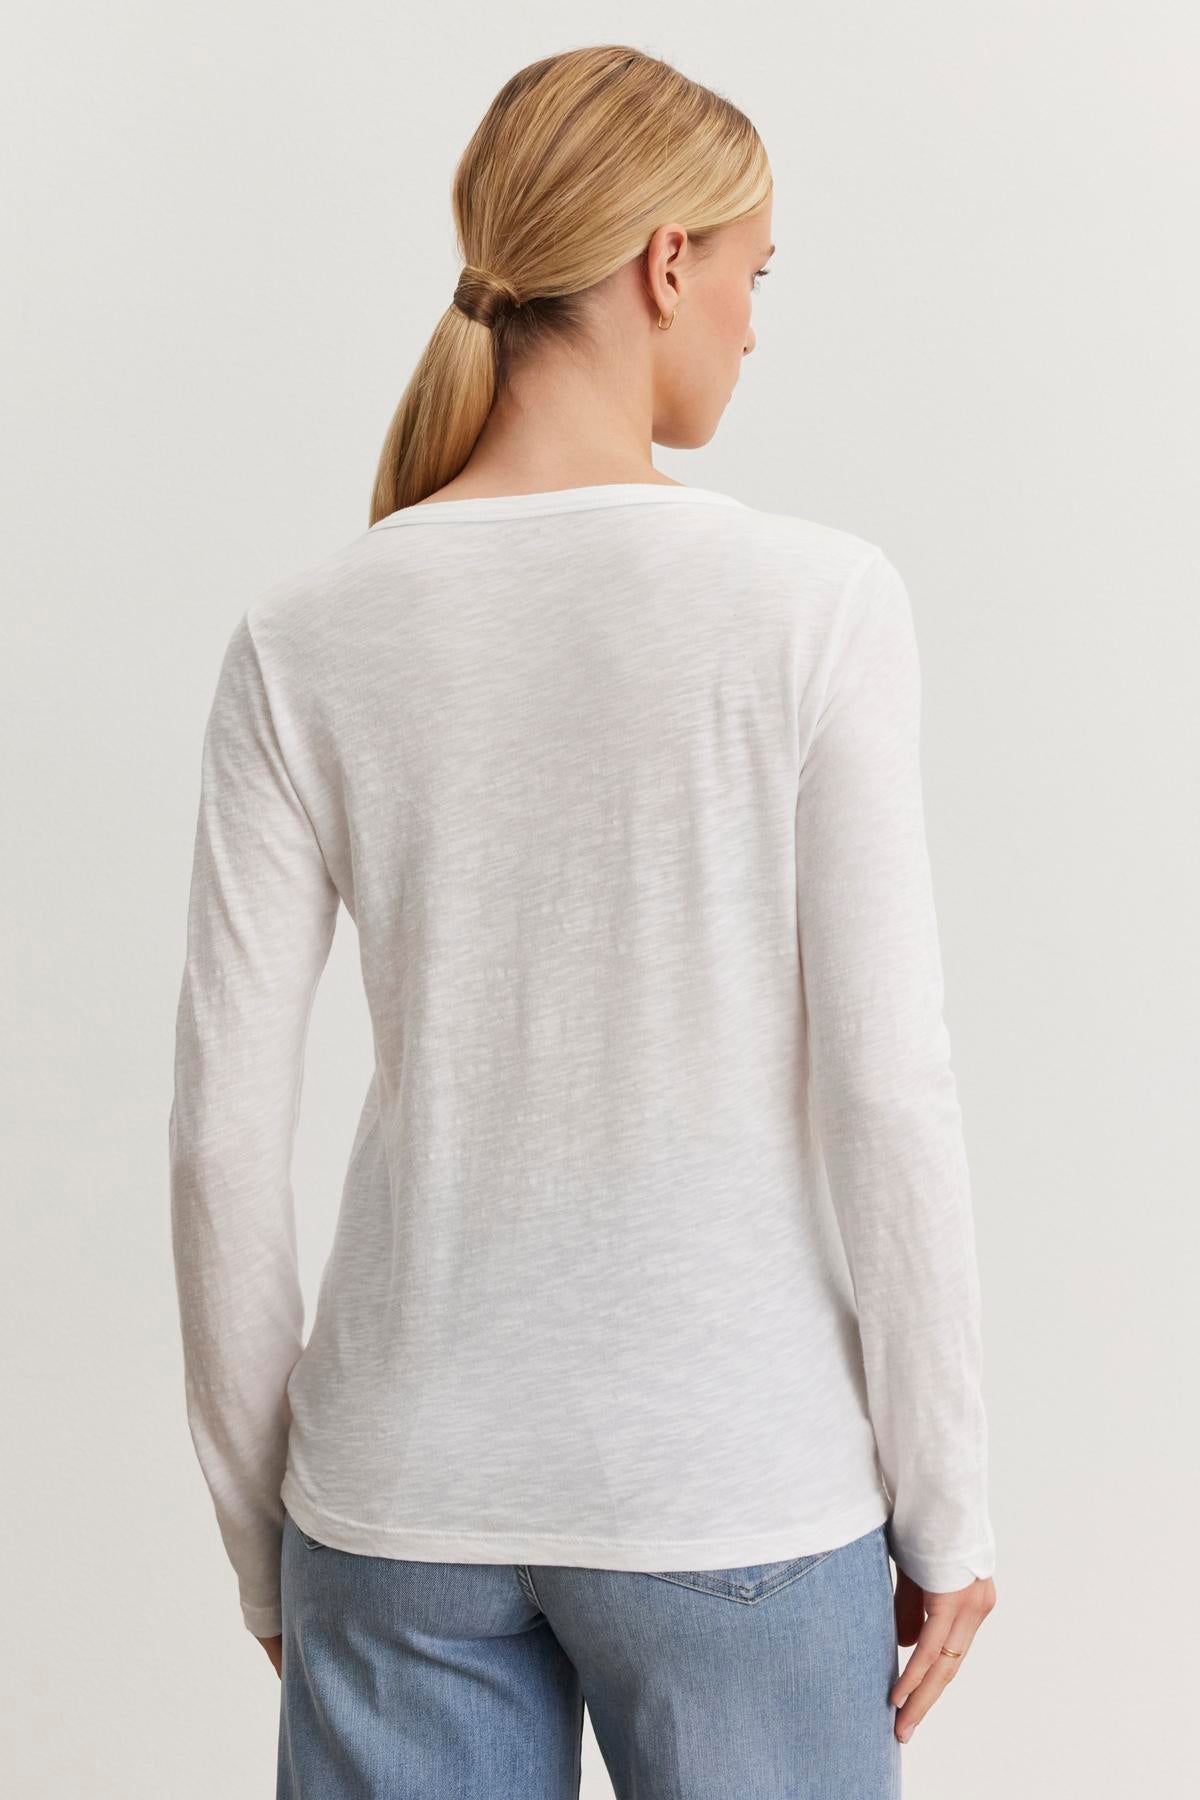   A person with blonde hair in a ponytail is shown from the back, wearing a long-sleeved white Velvet by Graham & Spencer LIZZIE TEE with a classic crew neckline and light blue jeans. 